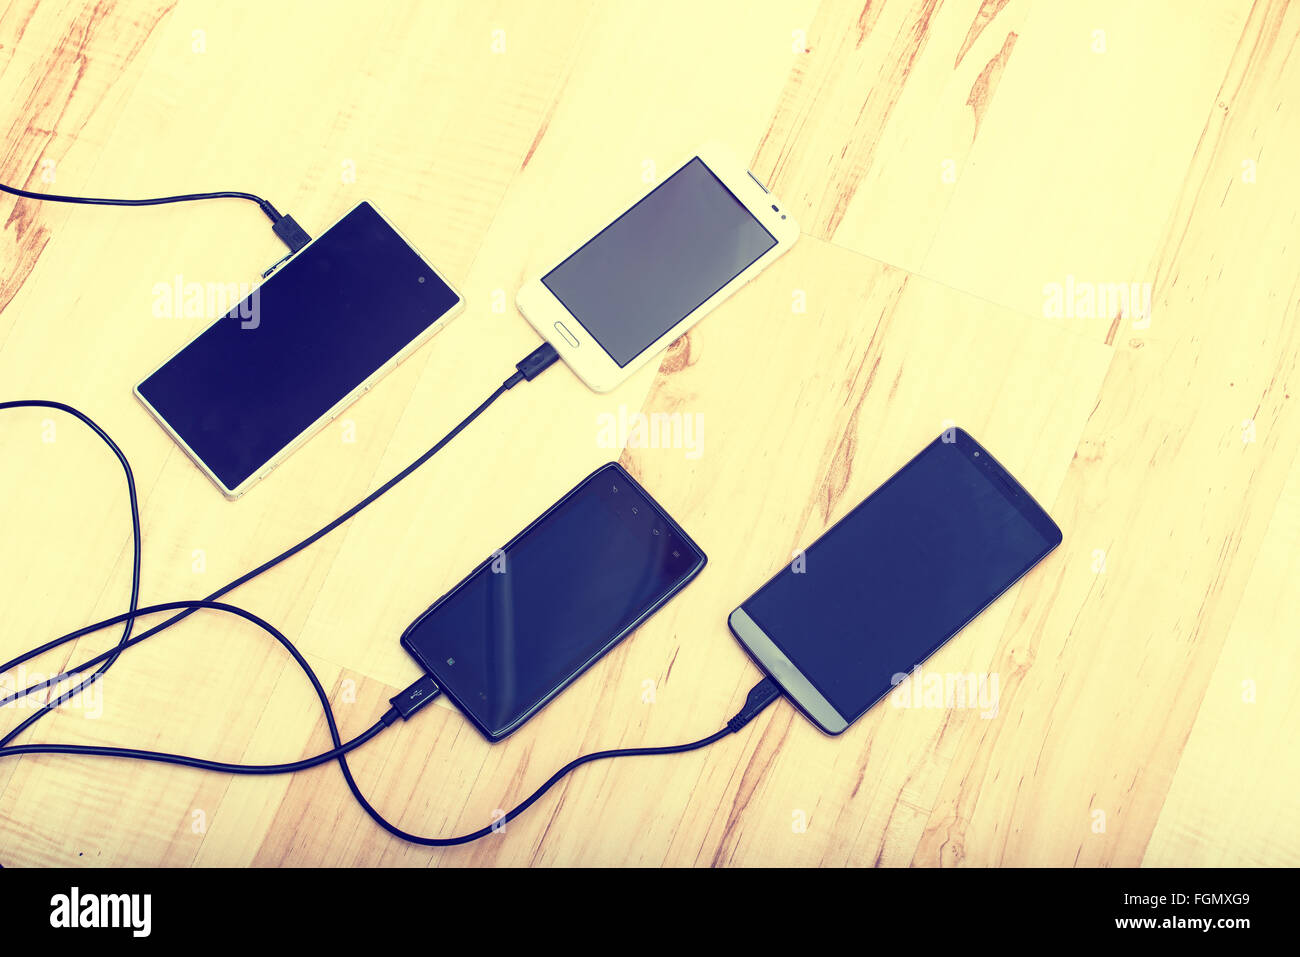 four smartphones connected to chargers Stock Photo